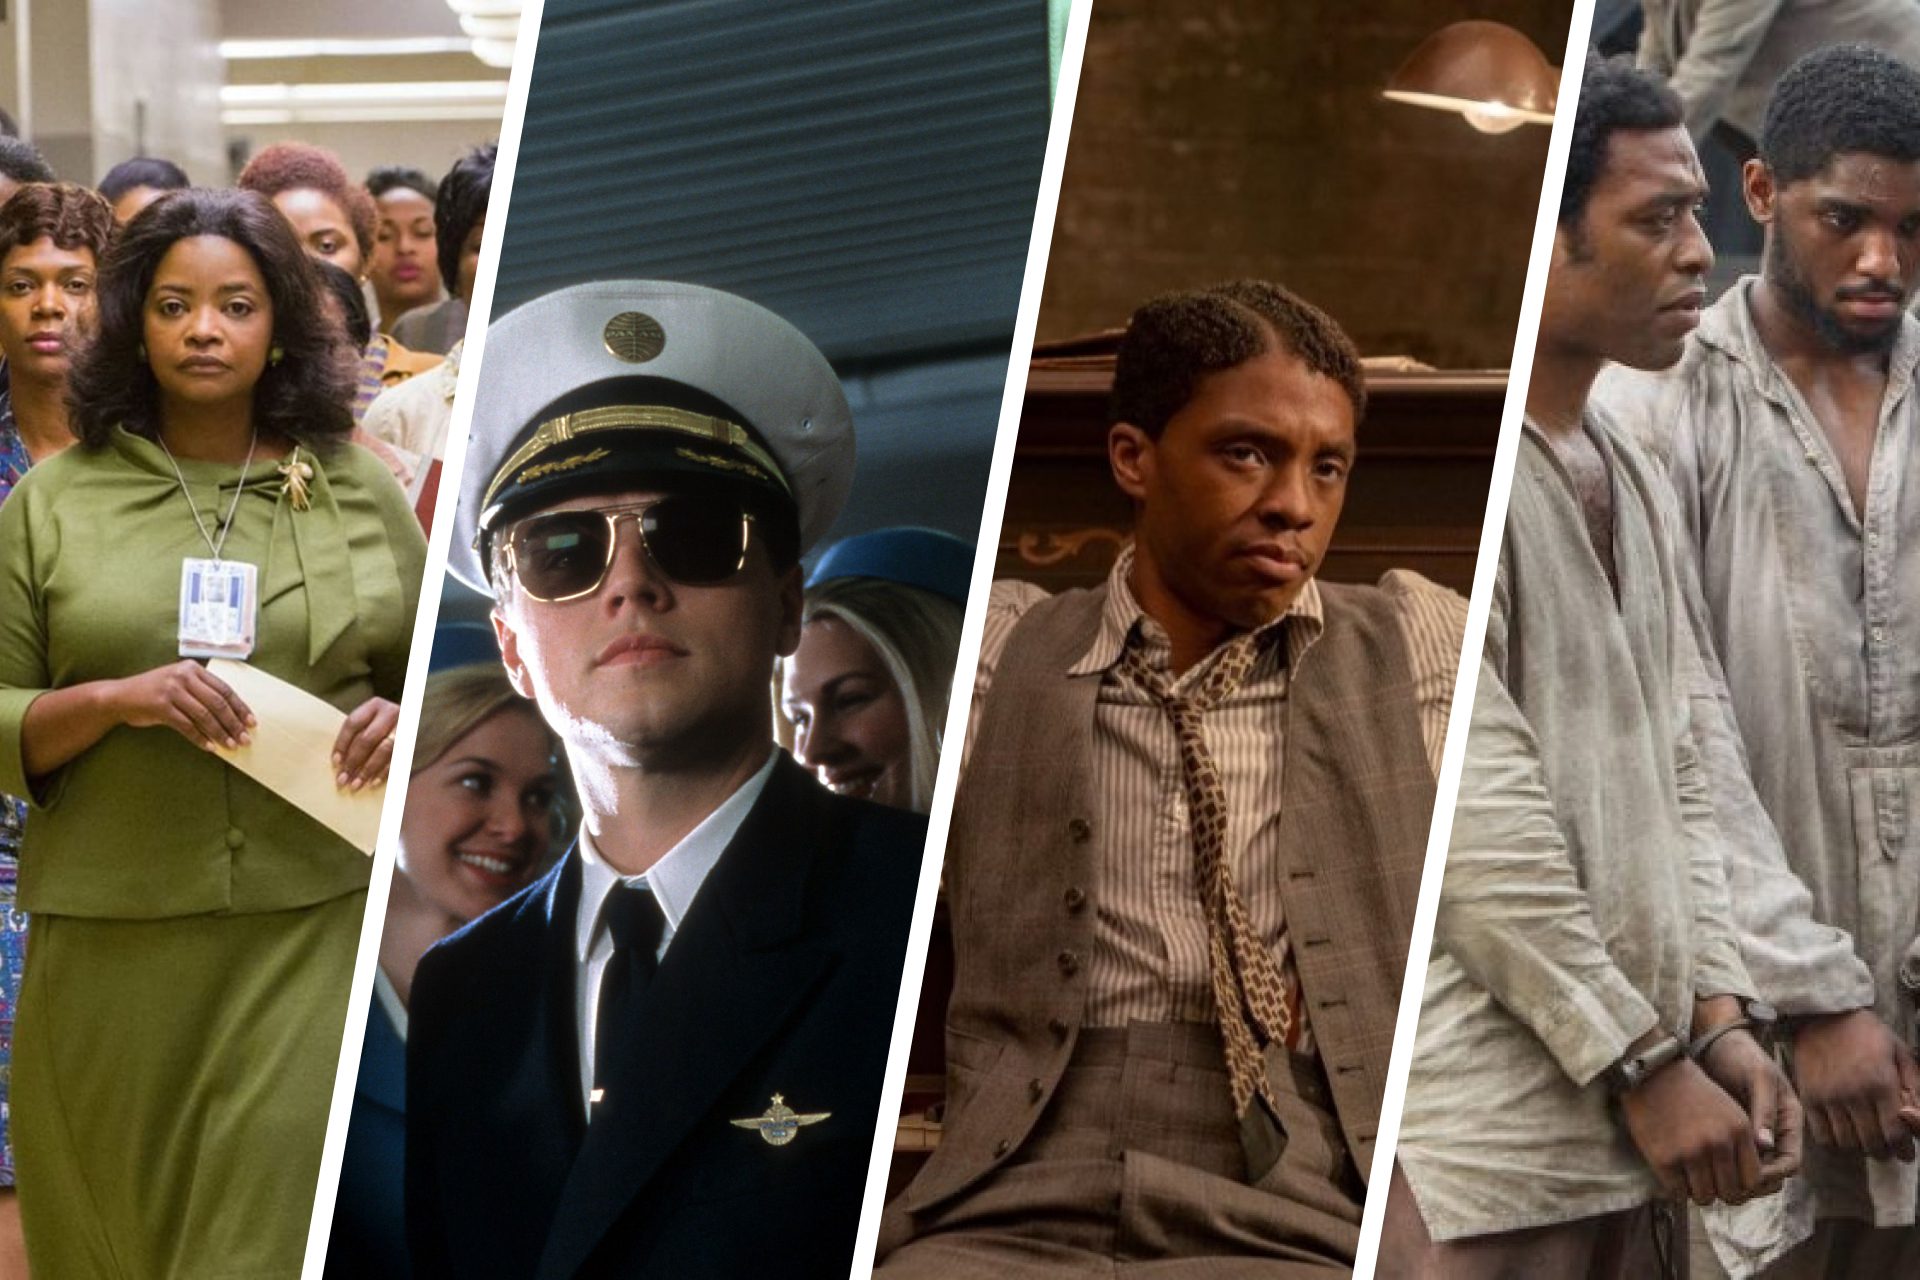 25 Best True Story Movies A Captivating Collection of Films Based on RealLife Events